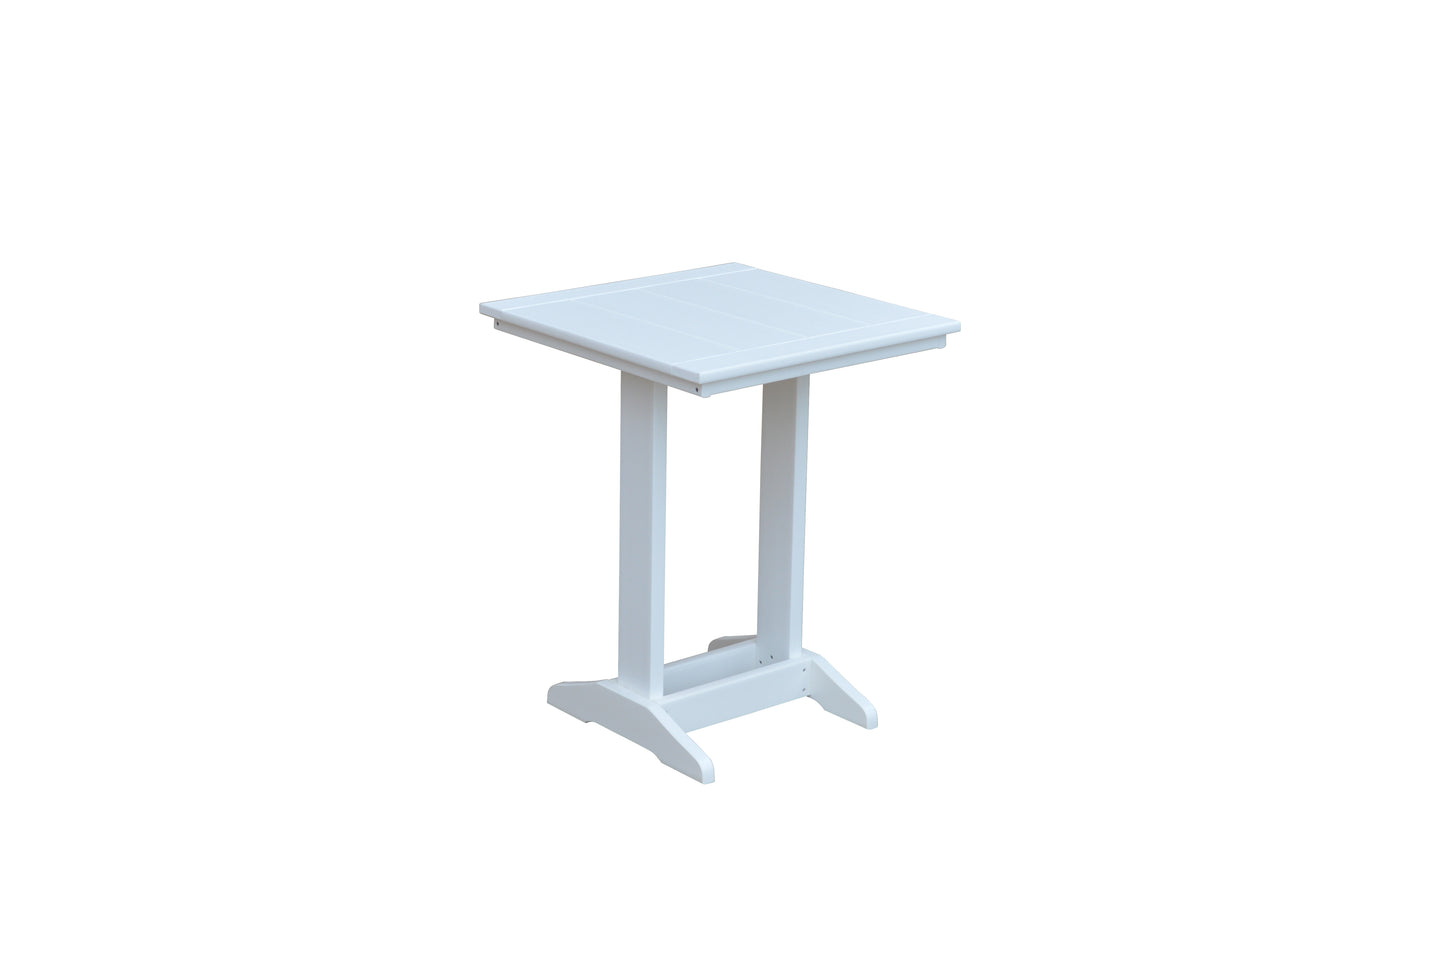 A&L Furniture Co. Recycled Plastic Square Balcony Side Table (PAIRS W/ COUNTER HEIGHT FURNITURE) - LEAD TIME TO SHIP 10 BUSINESS DAYS